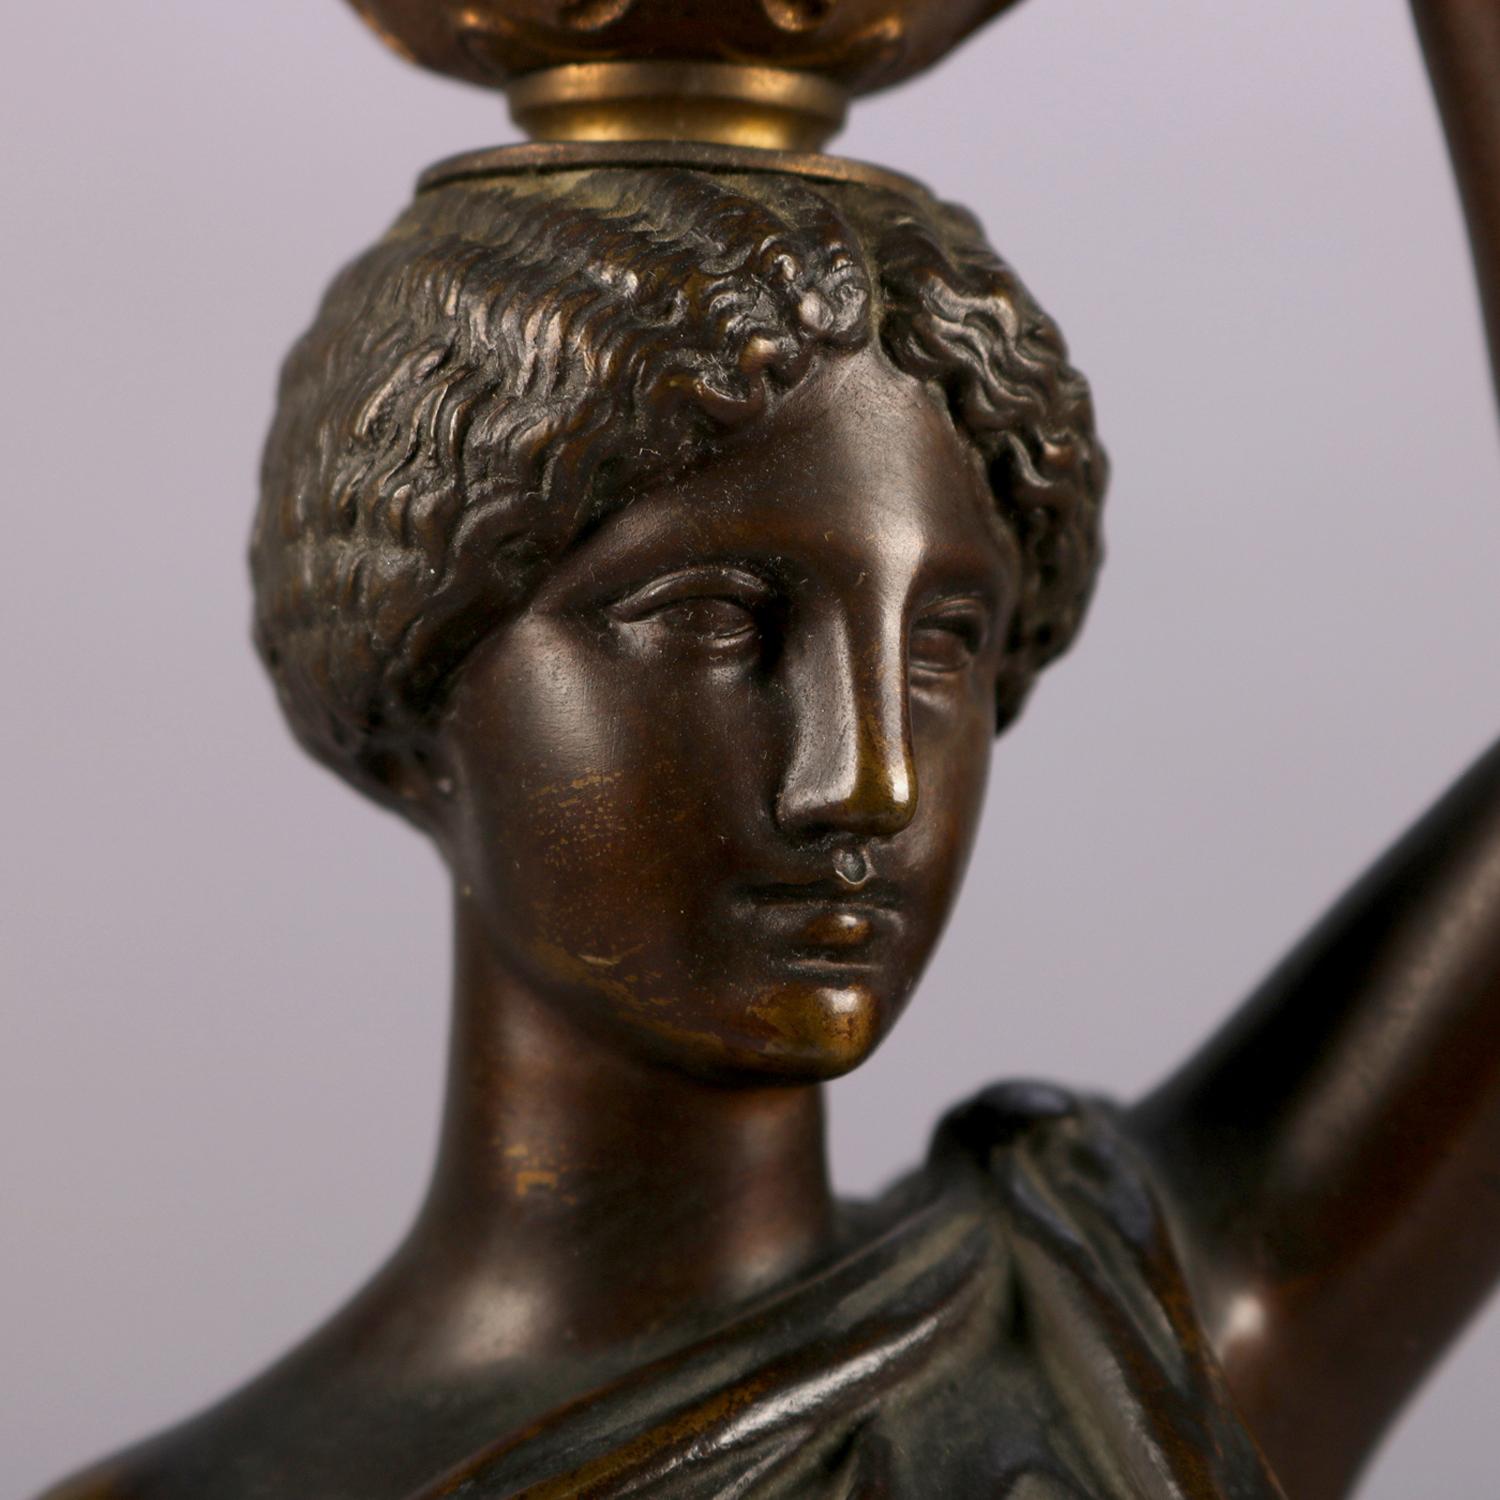 Antique French figural cast bronze portrait sculpture of Classical Greek Canephore (maiden, or woman, bearing a basket on her head in an early Greek religious festival) with pierced and gilt basket, seated on black marble base and signed Louis